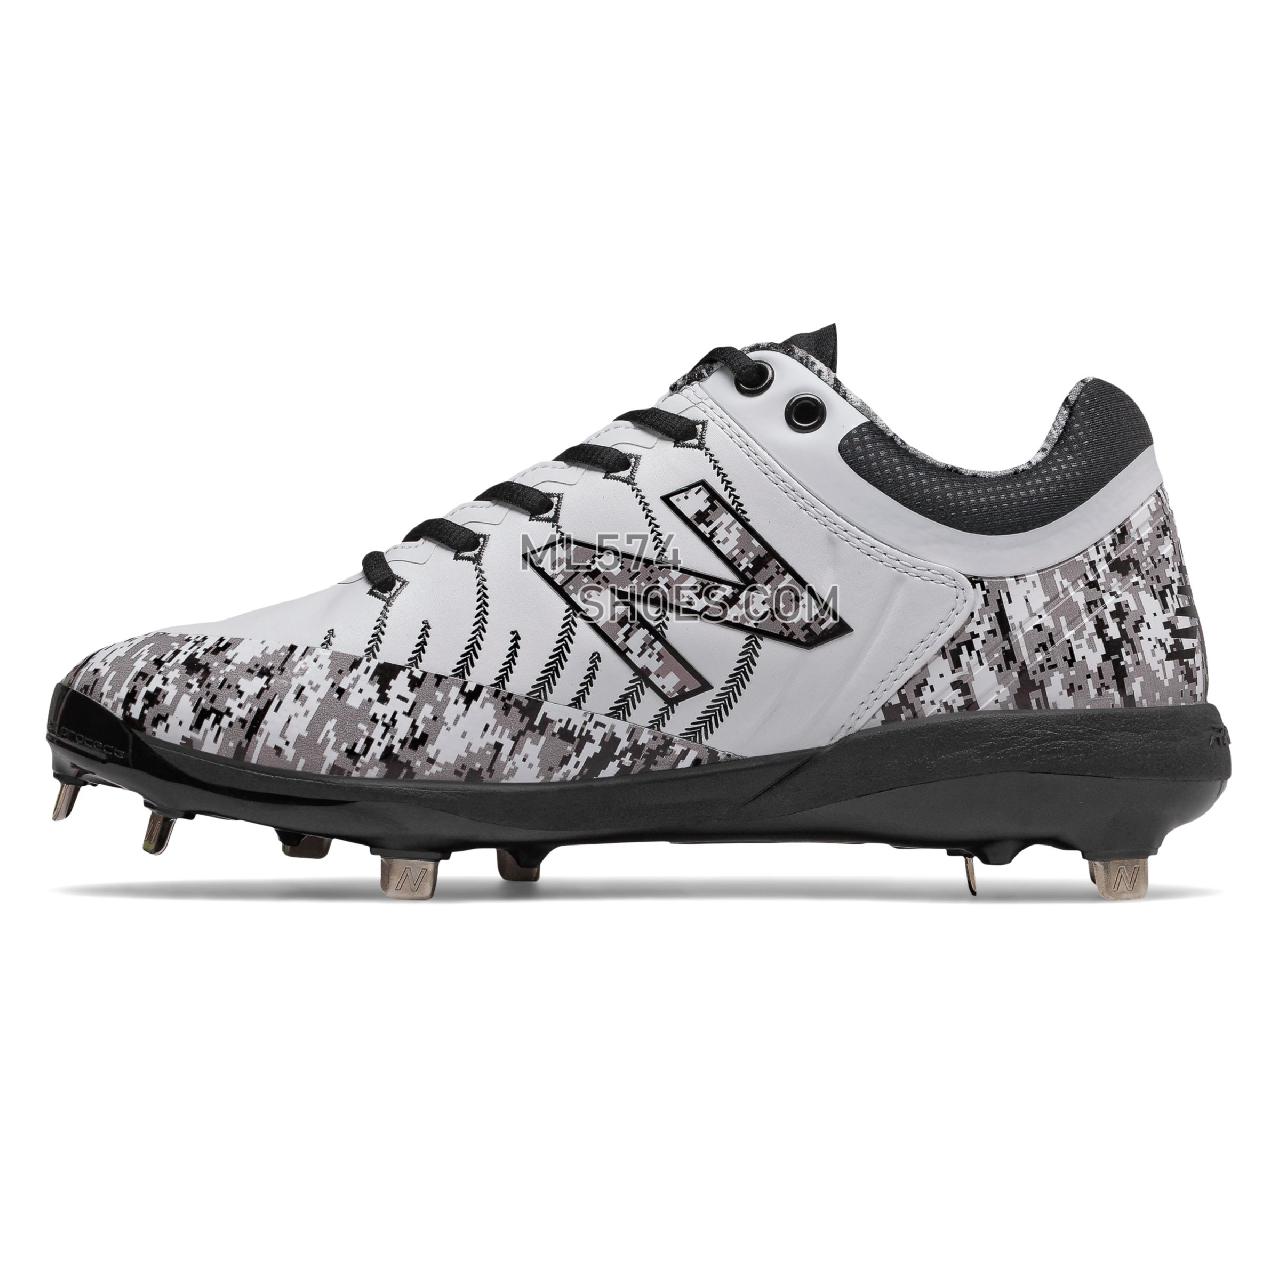 New Balance 4040v5 Pedroia Metal - Men's Baseball Turf - White with Black Camo and Red - L4040PW5